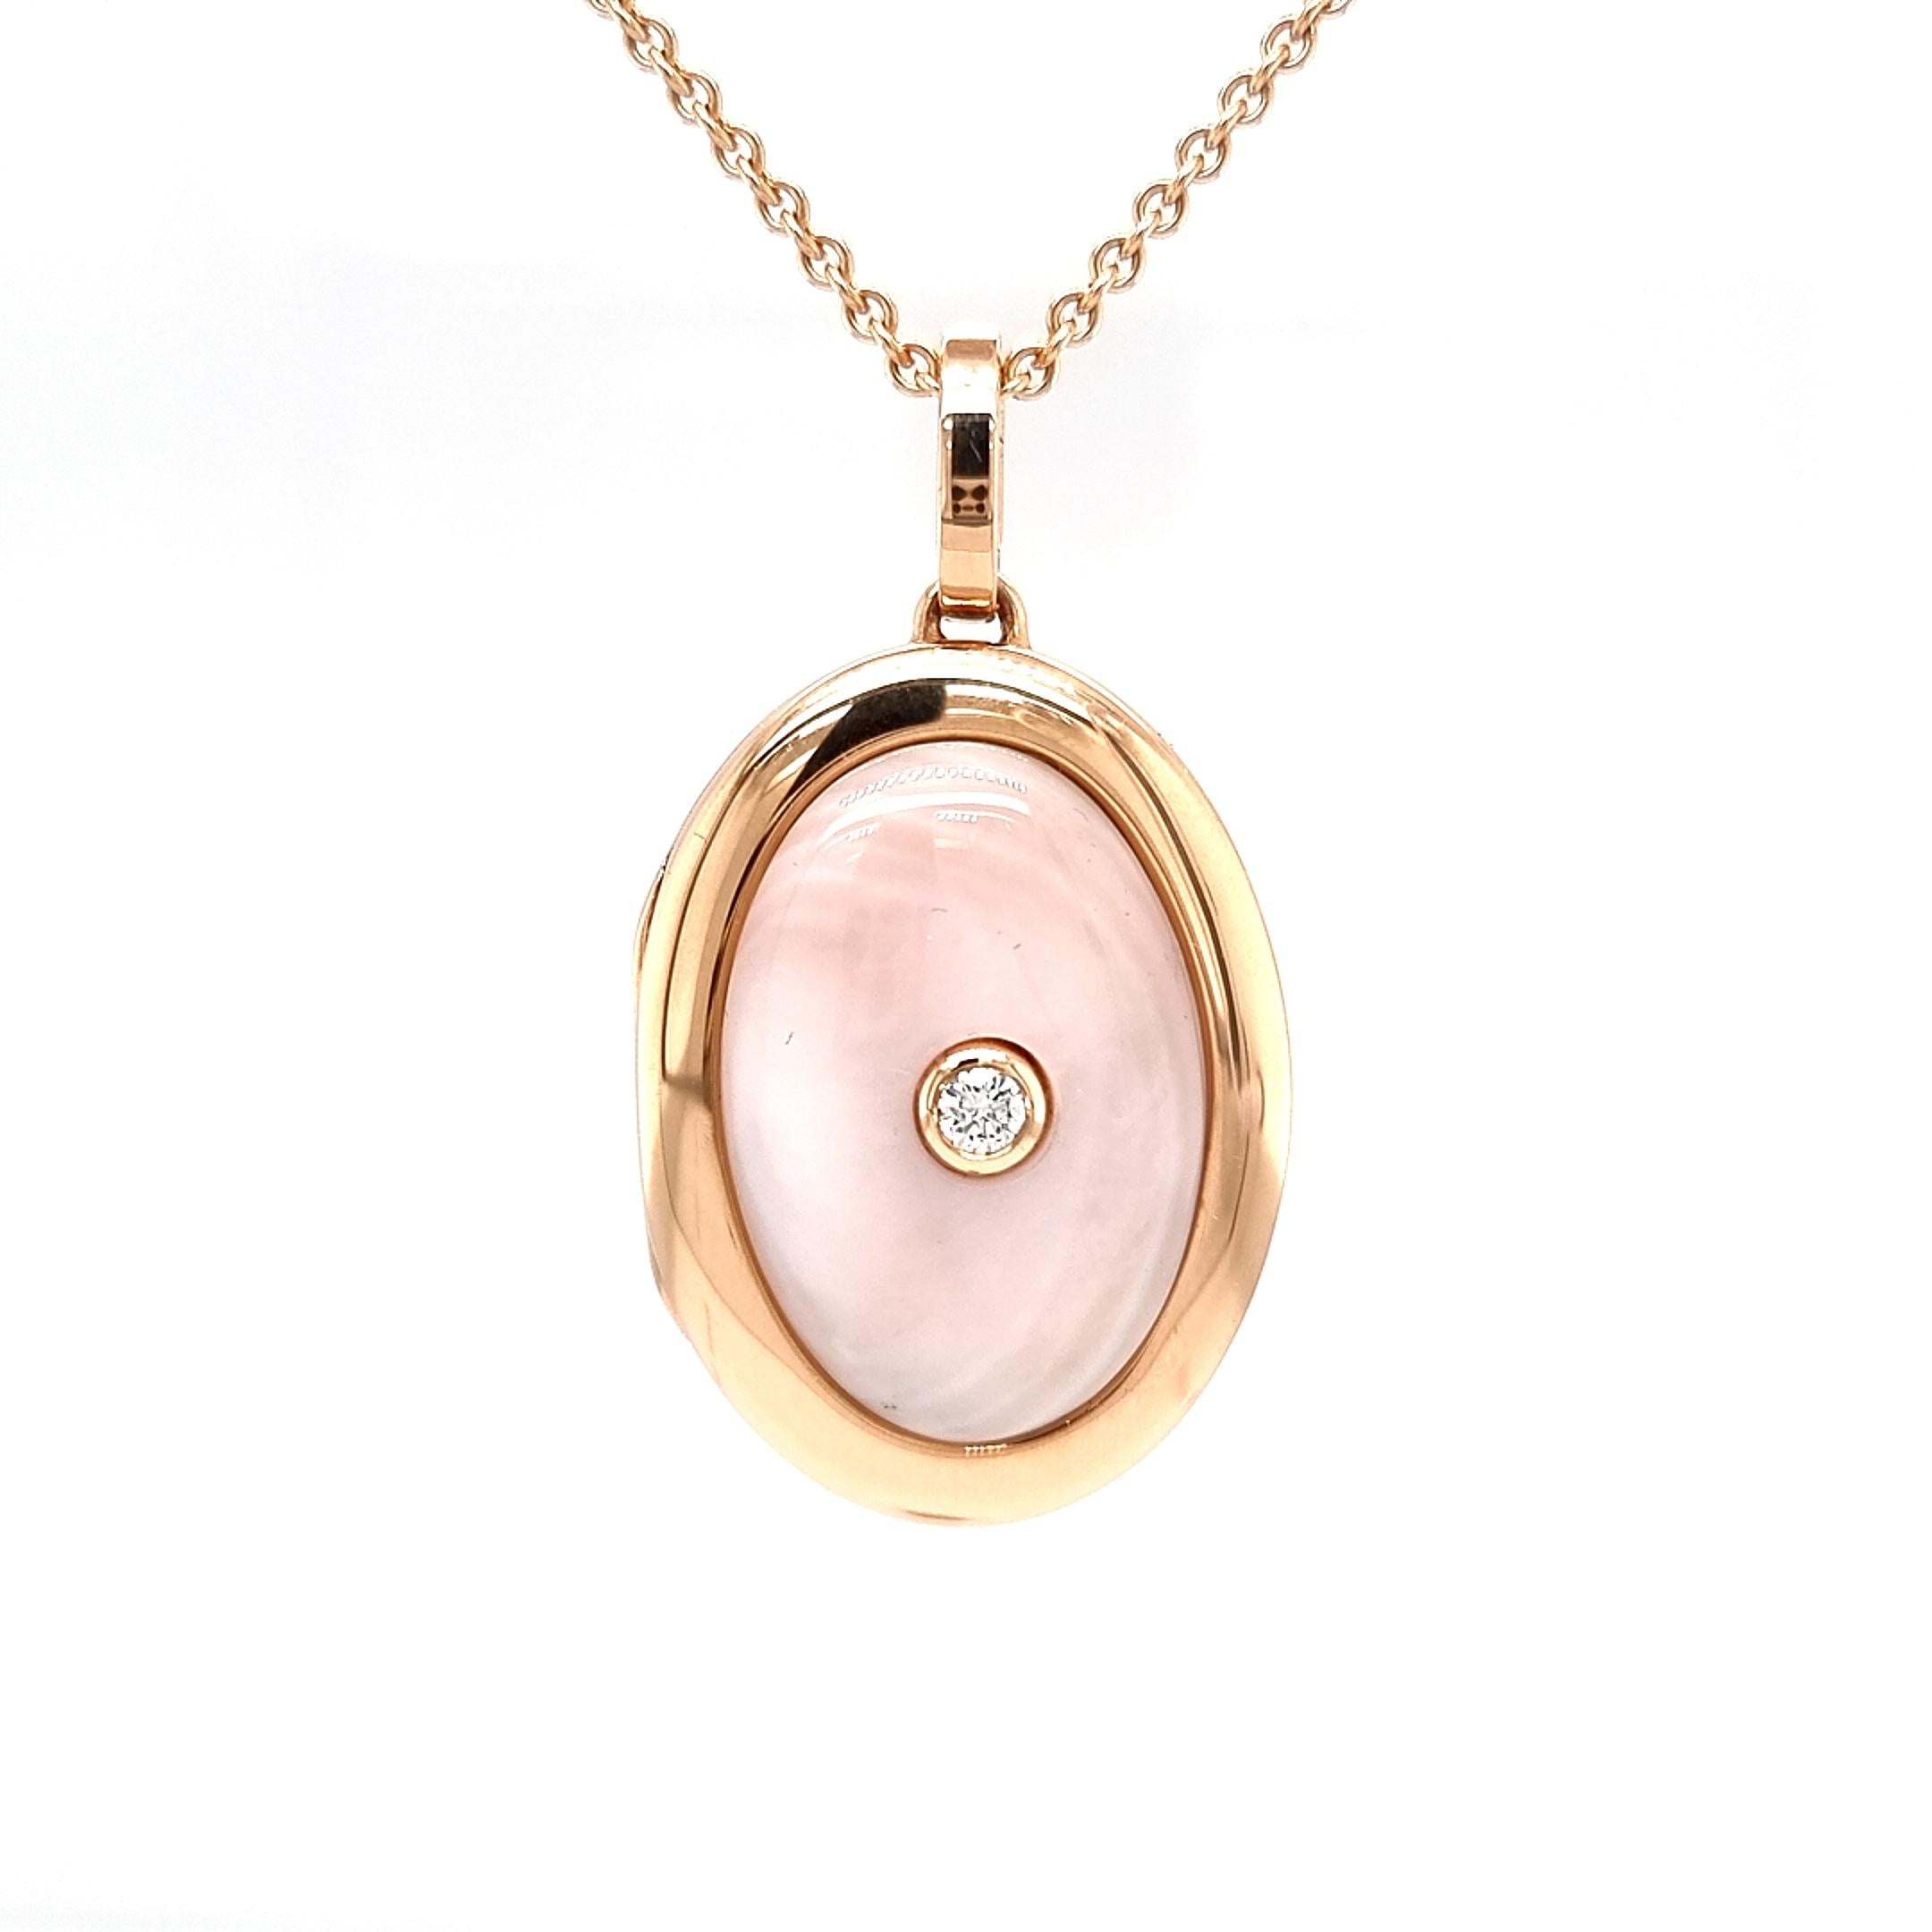 Victor Mayer customizable oval locket pendant necklace 18k rose gold, Hallmark collection, 1 diamond, total 0.10 ct, H VS, 1 pink cut pearl

About the creator Victor Mayer
Victor Mayer is internationally renowned for elegant timeless designs and